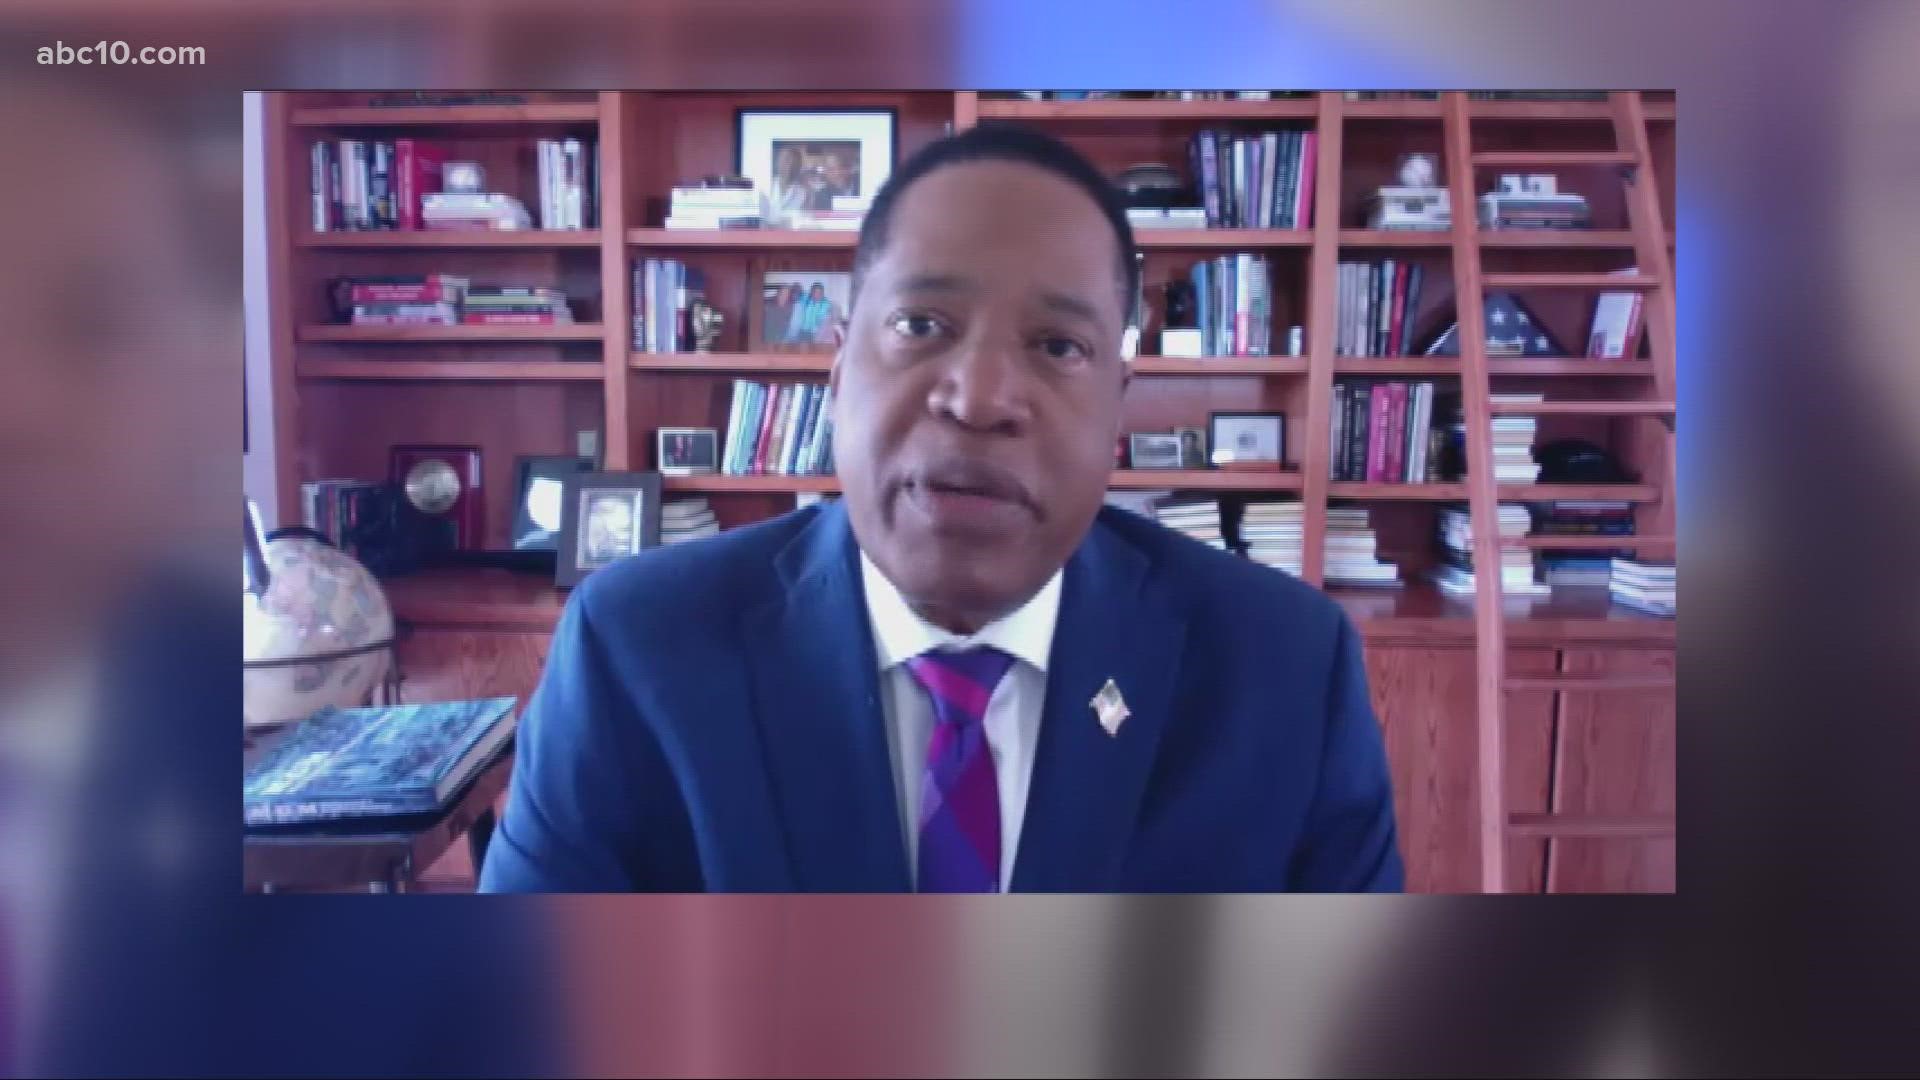 ABC10 political reporter Morgan Rynor asked gubernatorial candidate Larry Elder about accusations that he pointed a gun at his ex-wife in the past.